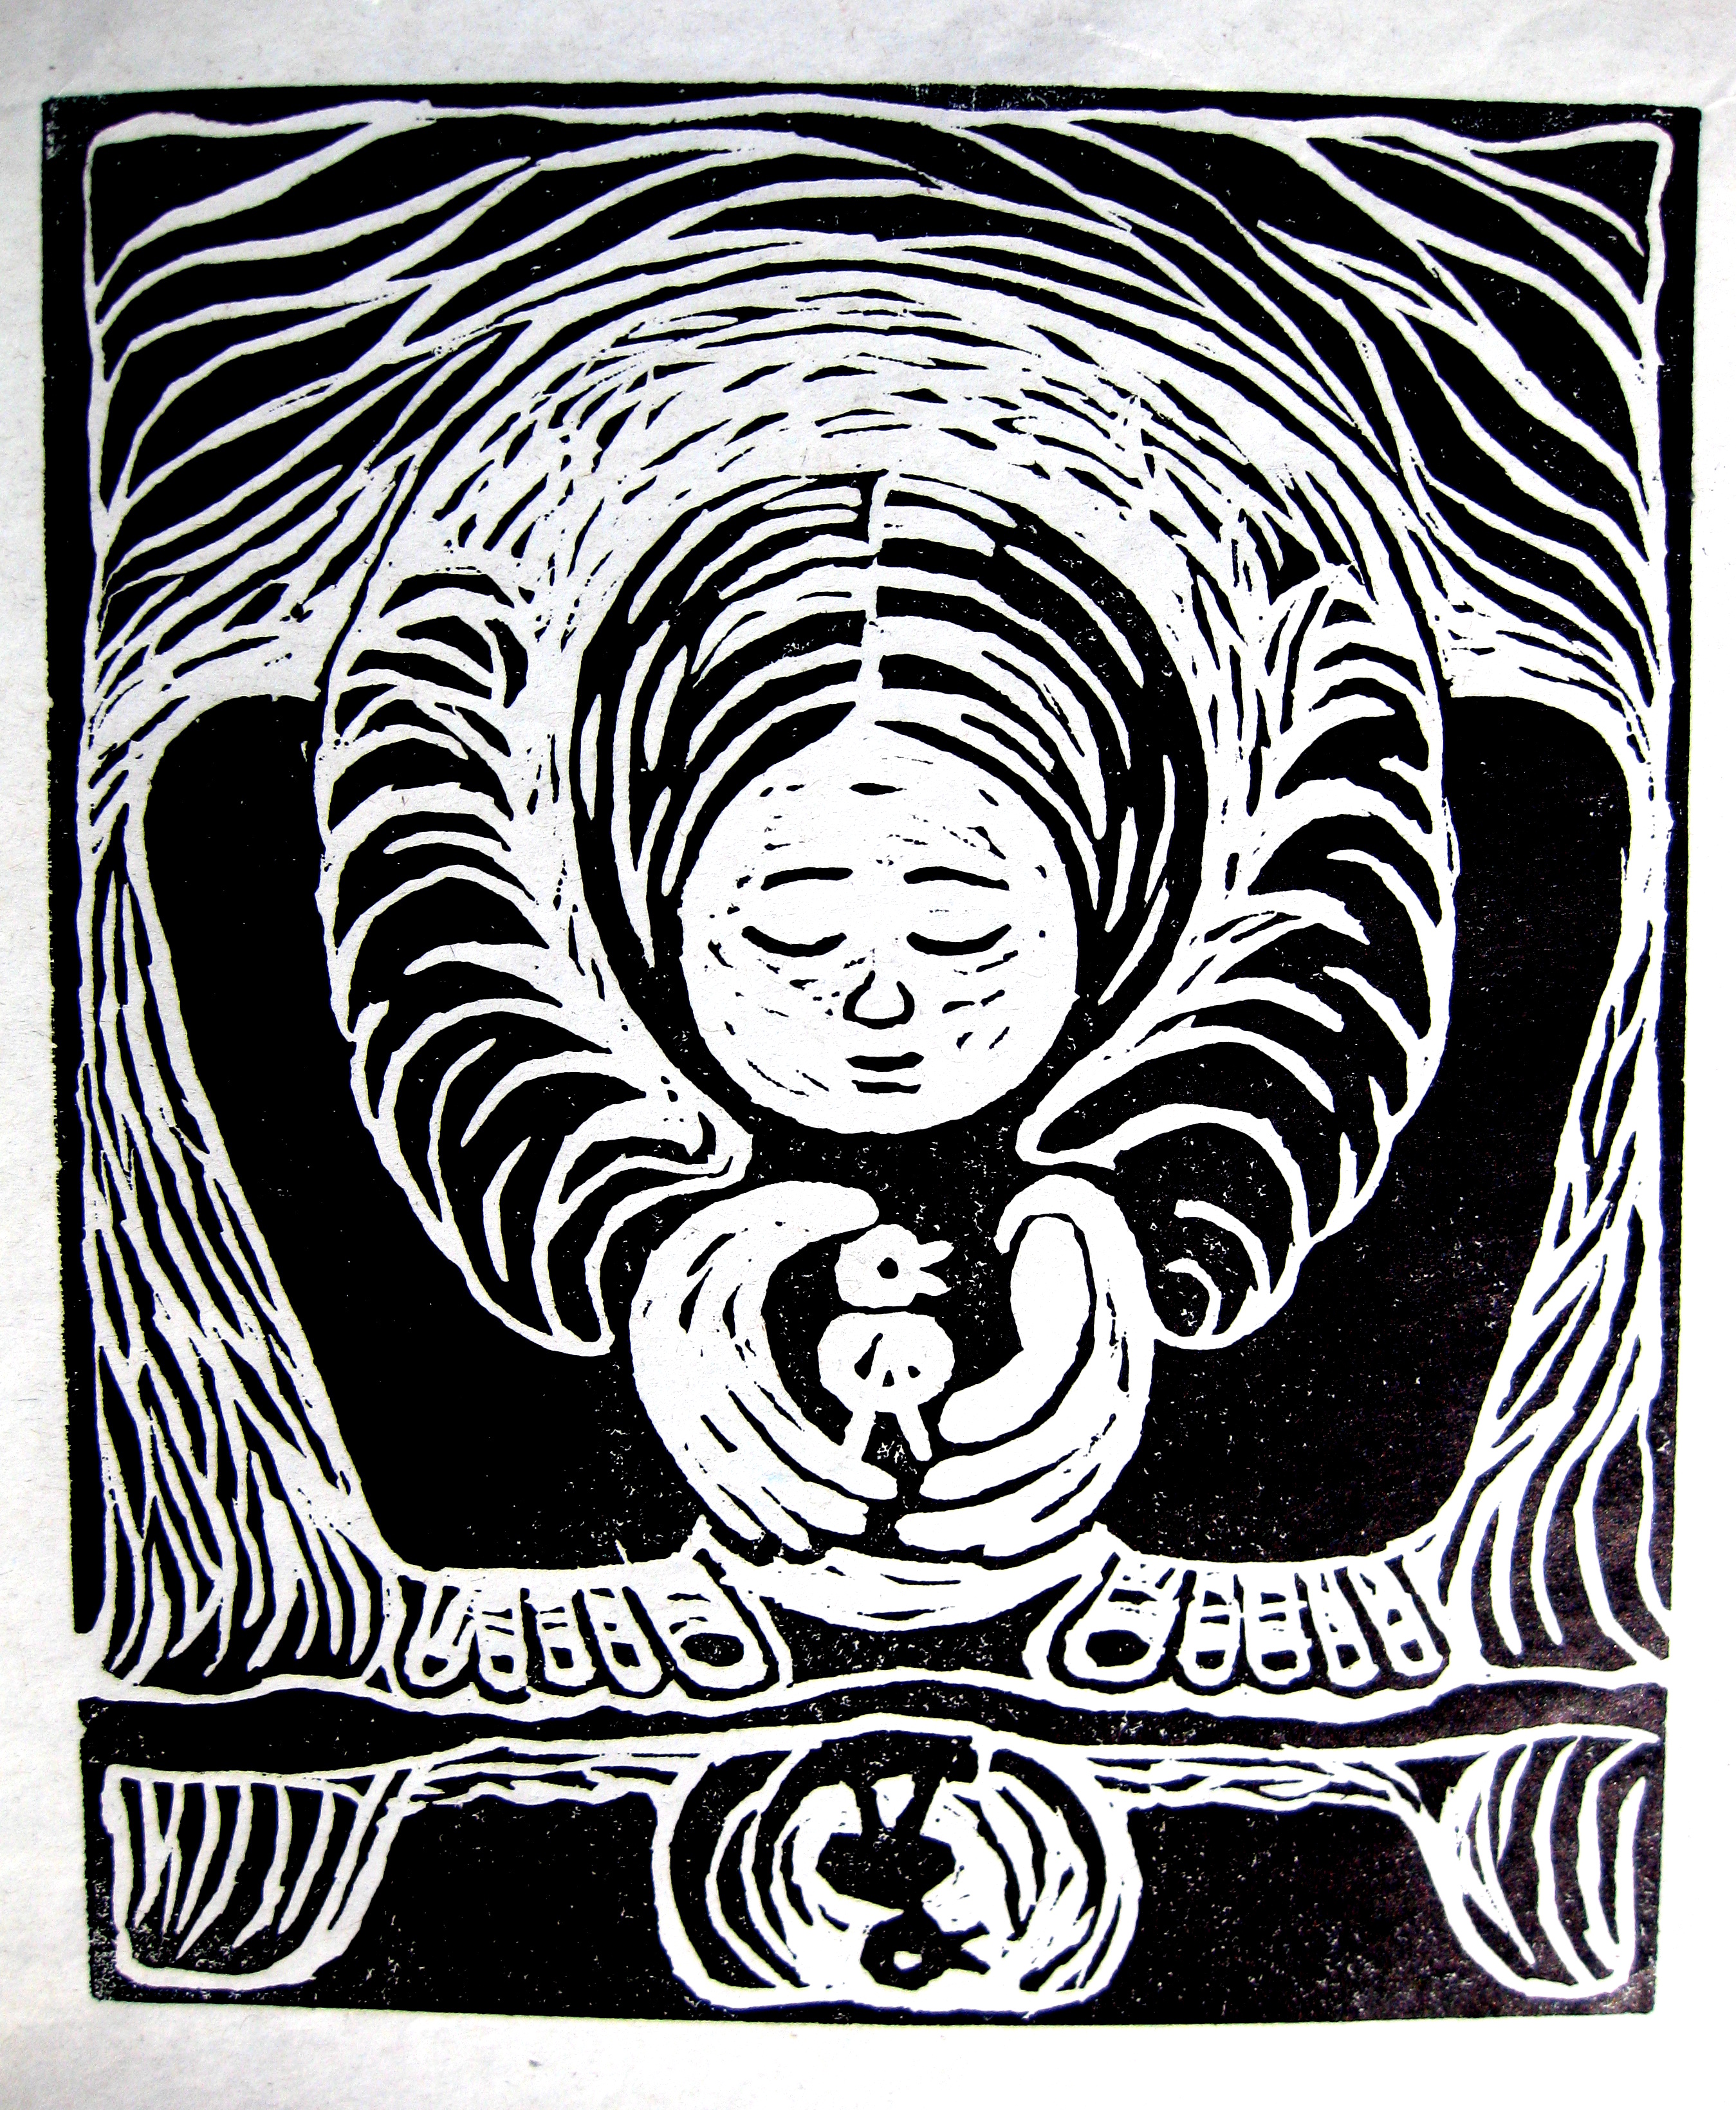 Child with duckling (linocut print)